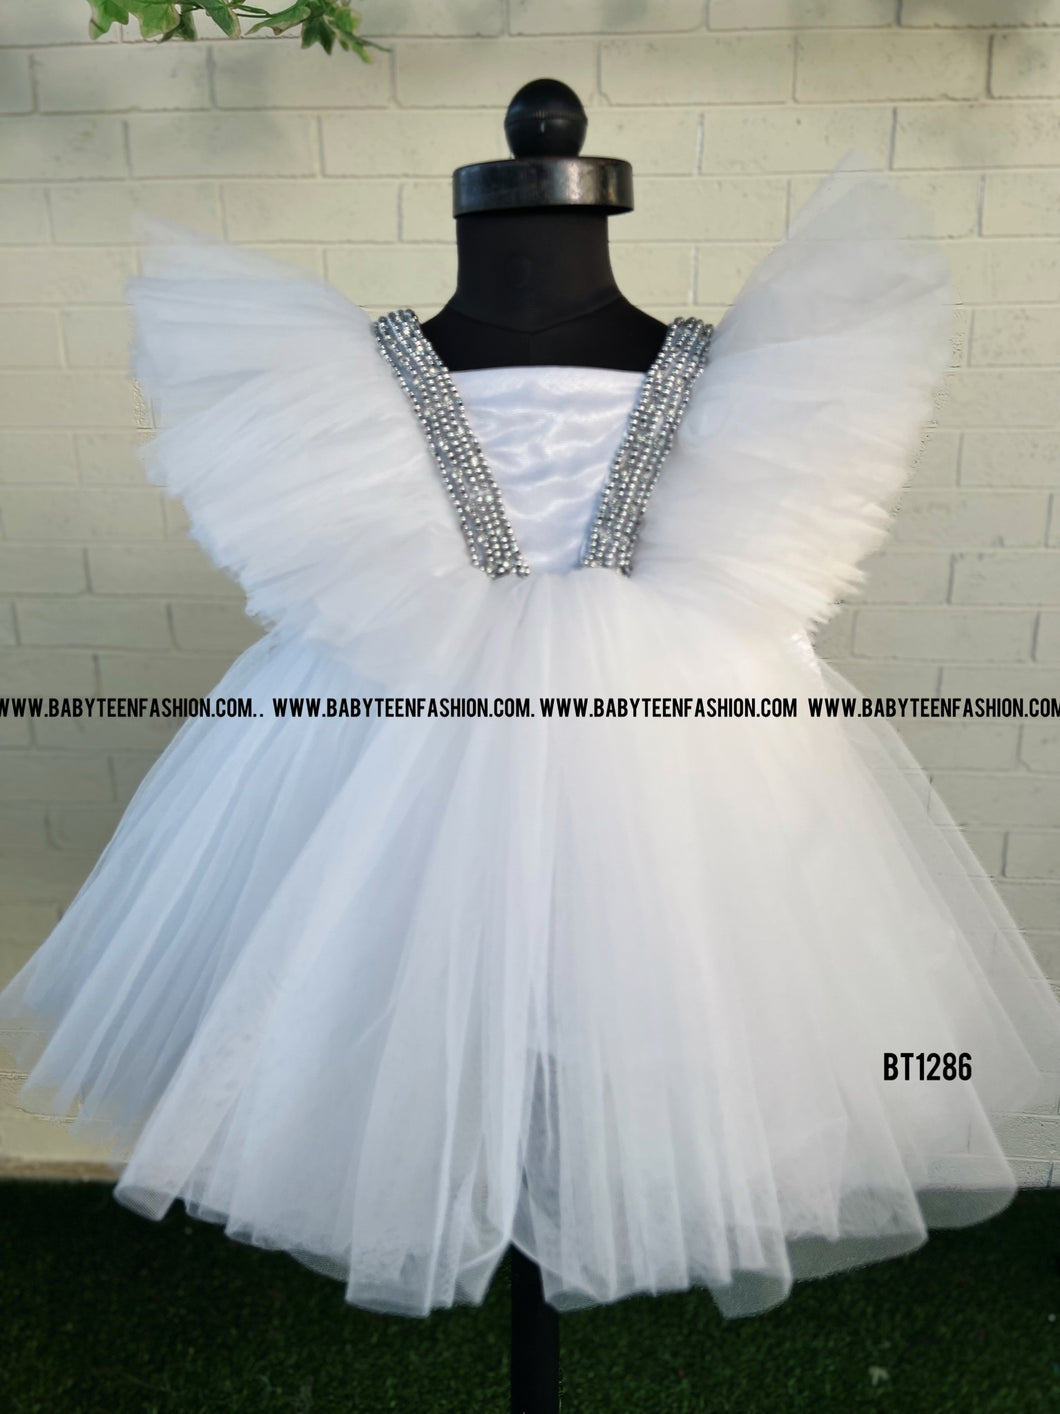 BT1286 White Party Frock for Baptism or Birthday